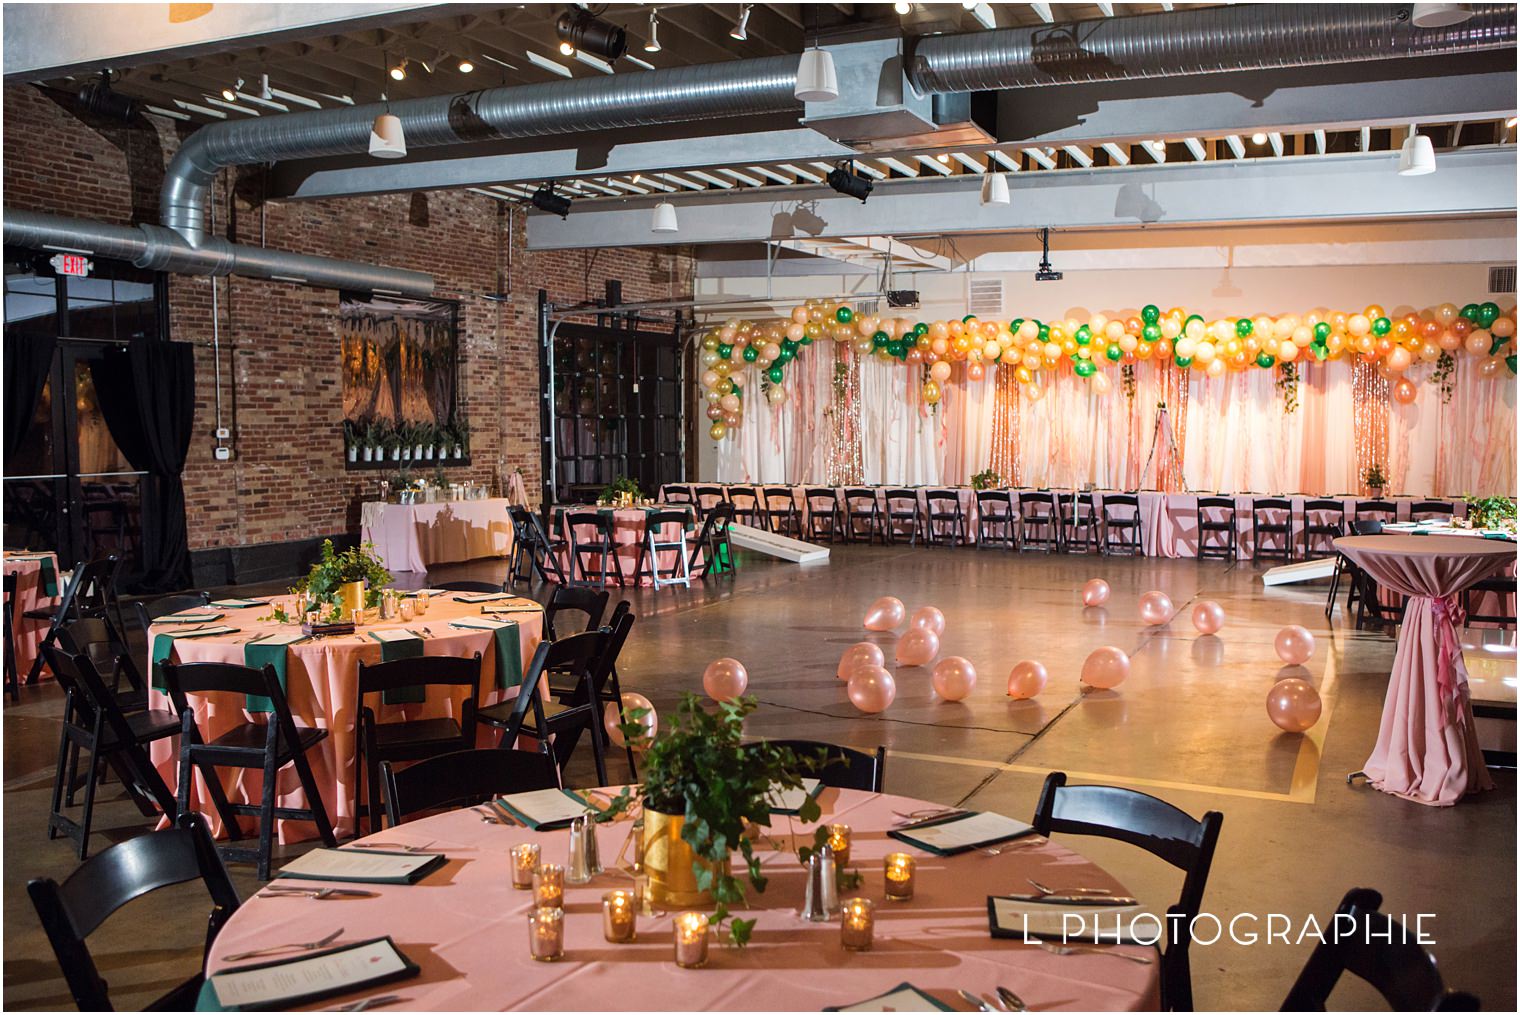 Central Reform Congregation,Ivy,Jewish,Jewish tradition,L Photographie,L Photographie mitzvahs,Meredith Marquardt,St. Louis mitzvah photography,Third Degree Glass Factory,bat mitzvah,best St. Louis mitzvah photographer,bohemian,greenery,pink and green,pink and ivy theme,